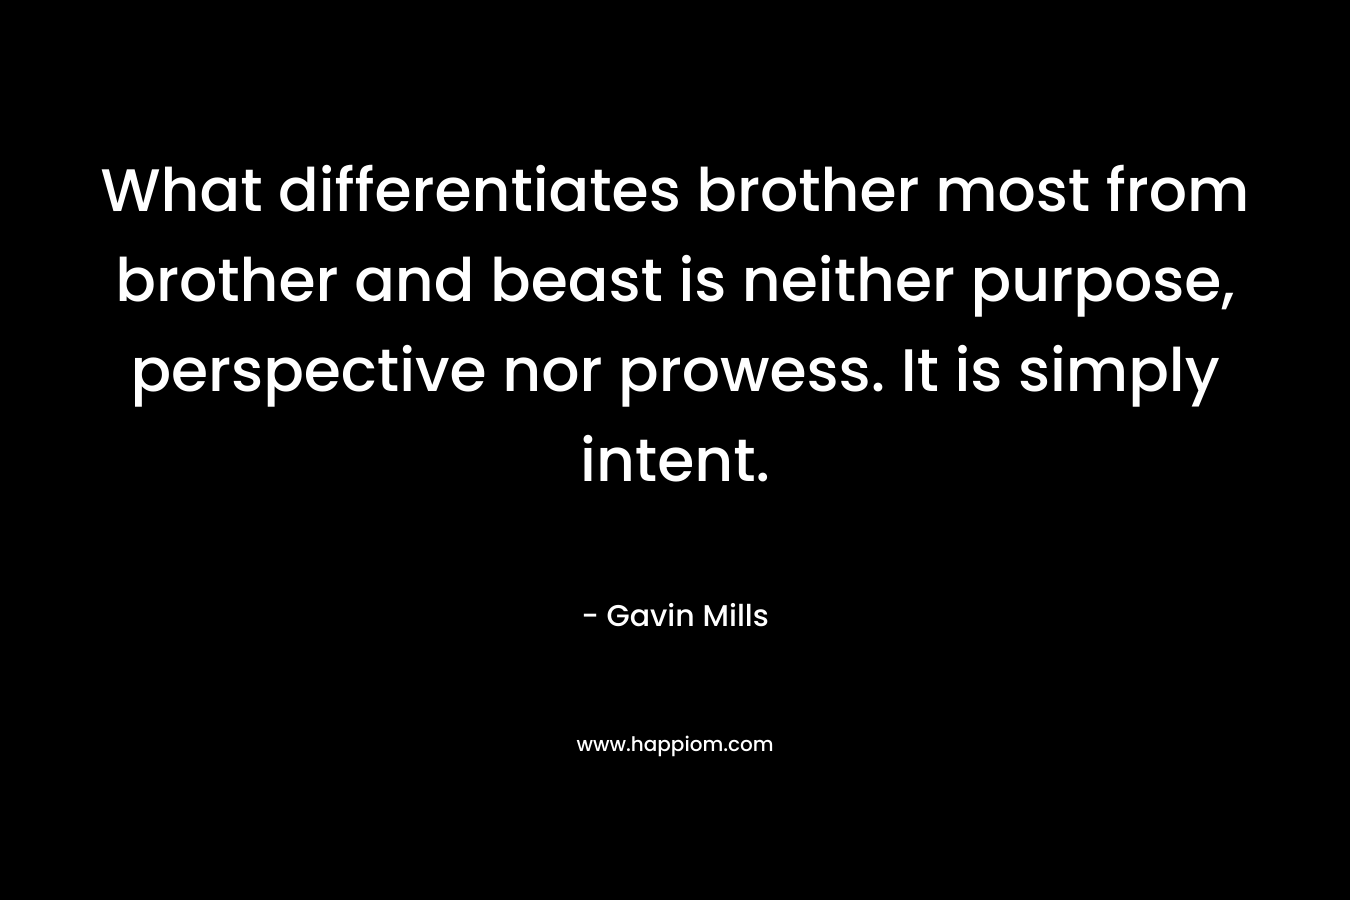 What differentiates brother most from brother and beast is neither purpose, perspective nor prowess. It is simply intent.